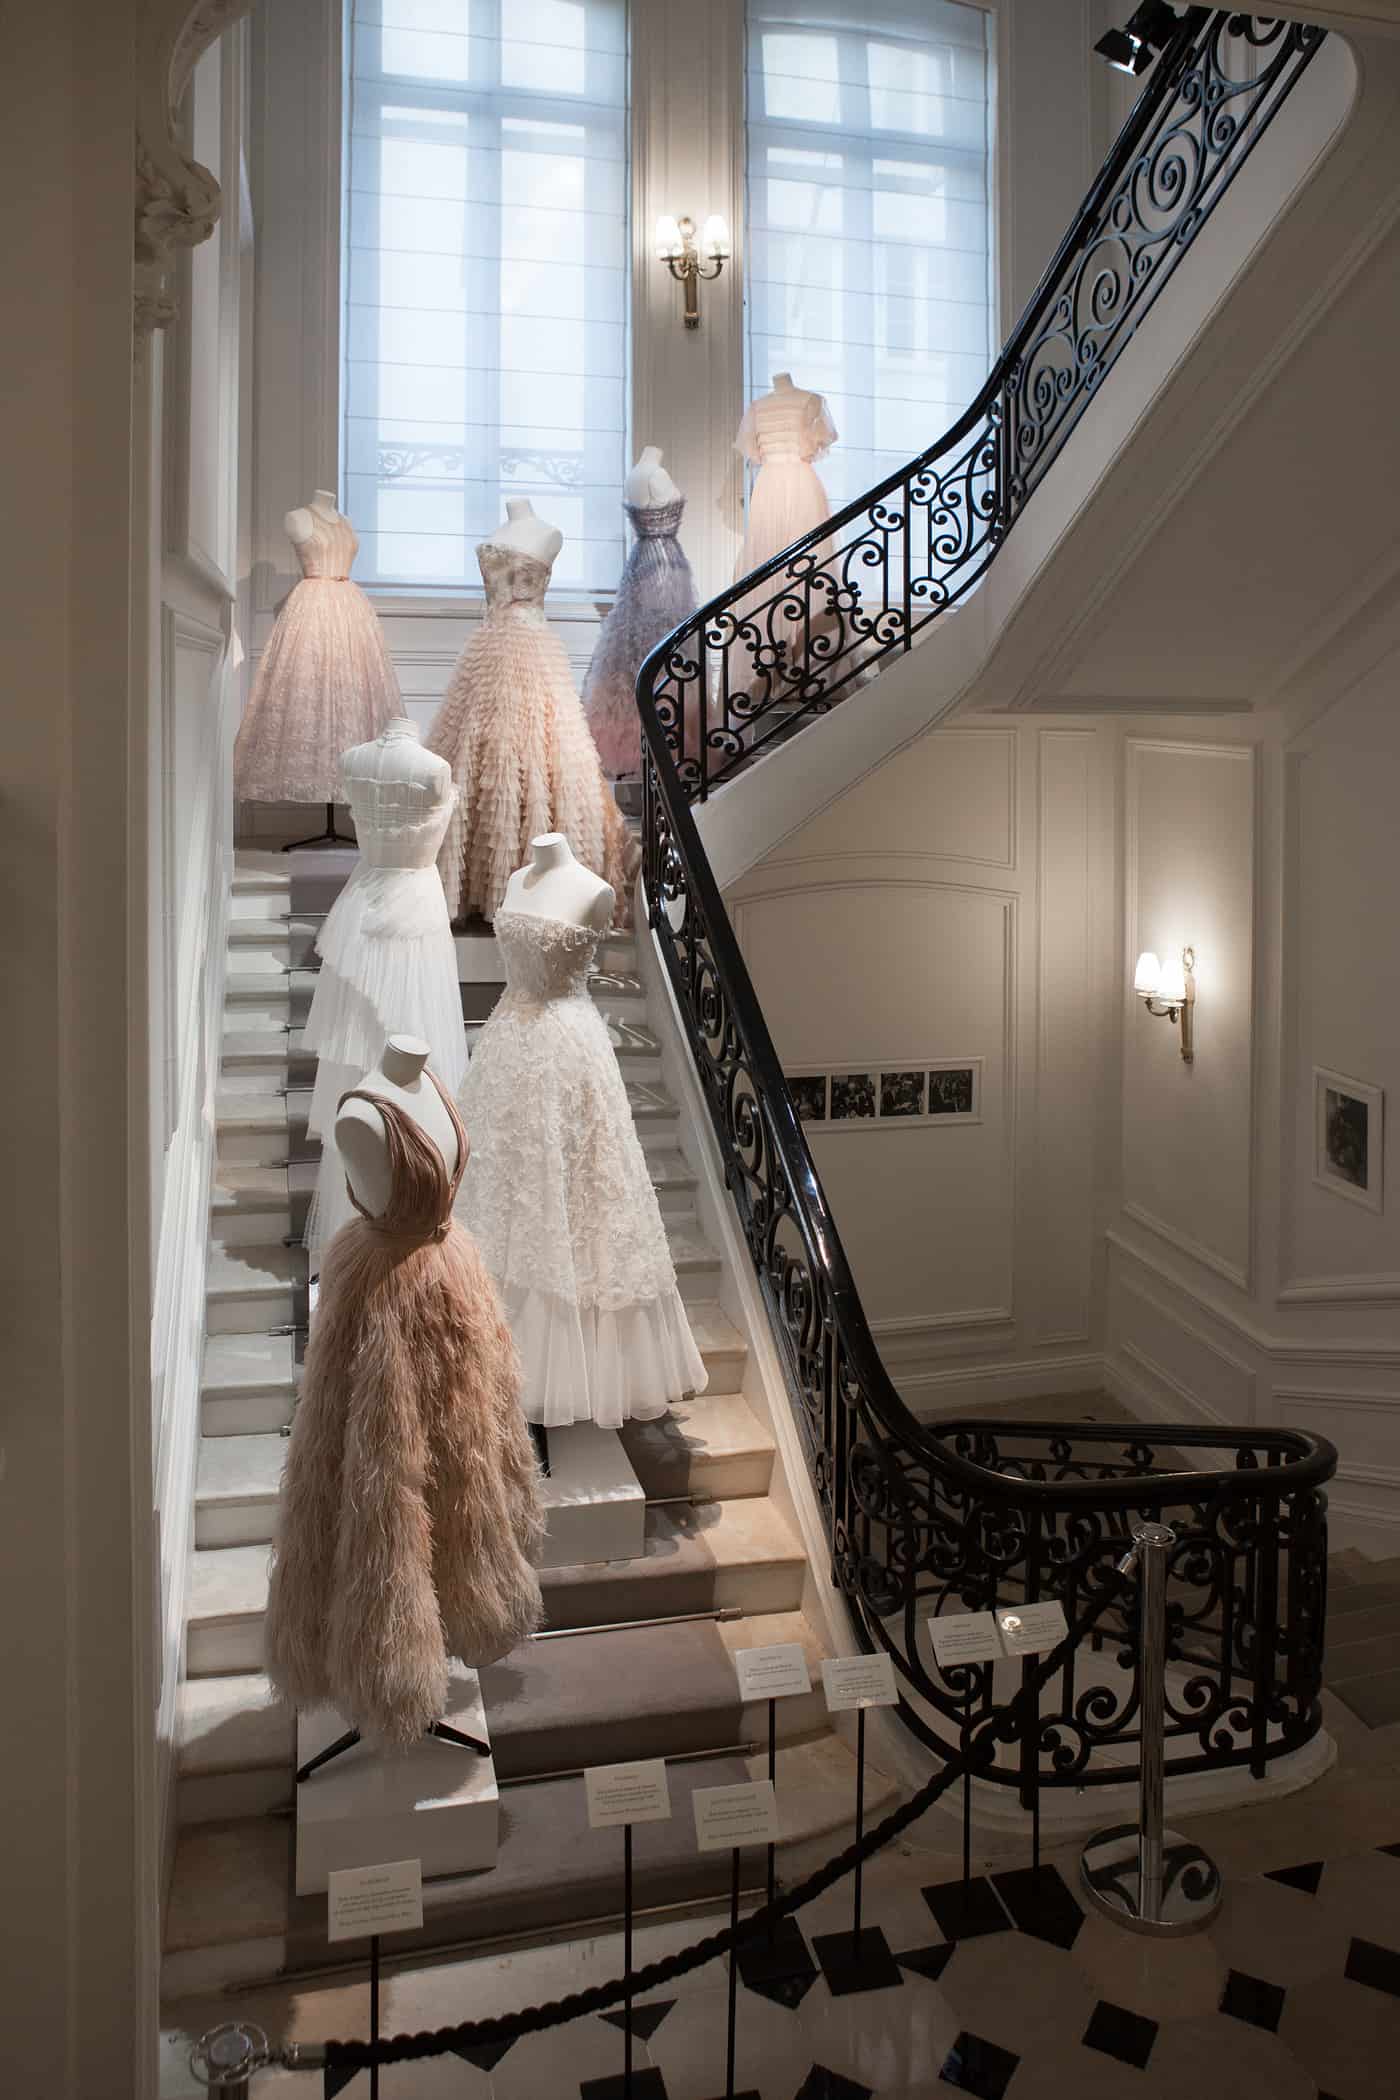 Look Inside Dior's Storied Atelier — Pictures and Video From Inside Dior